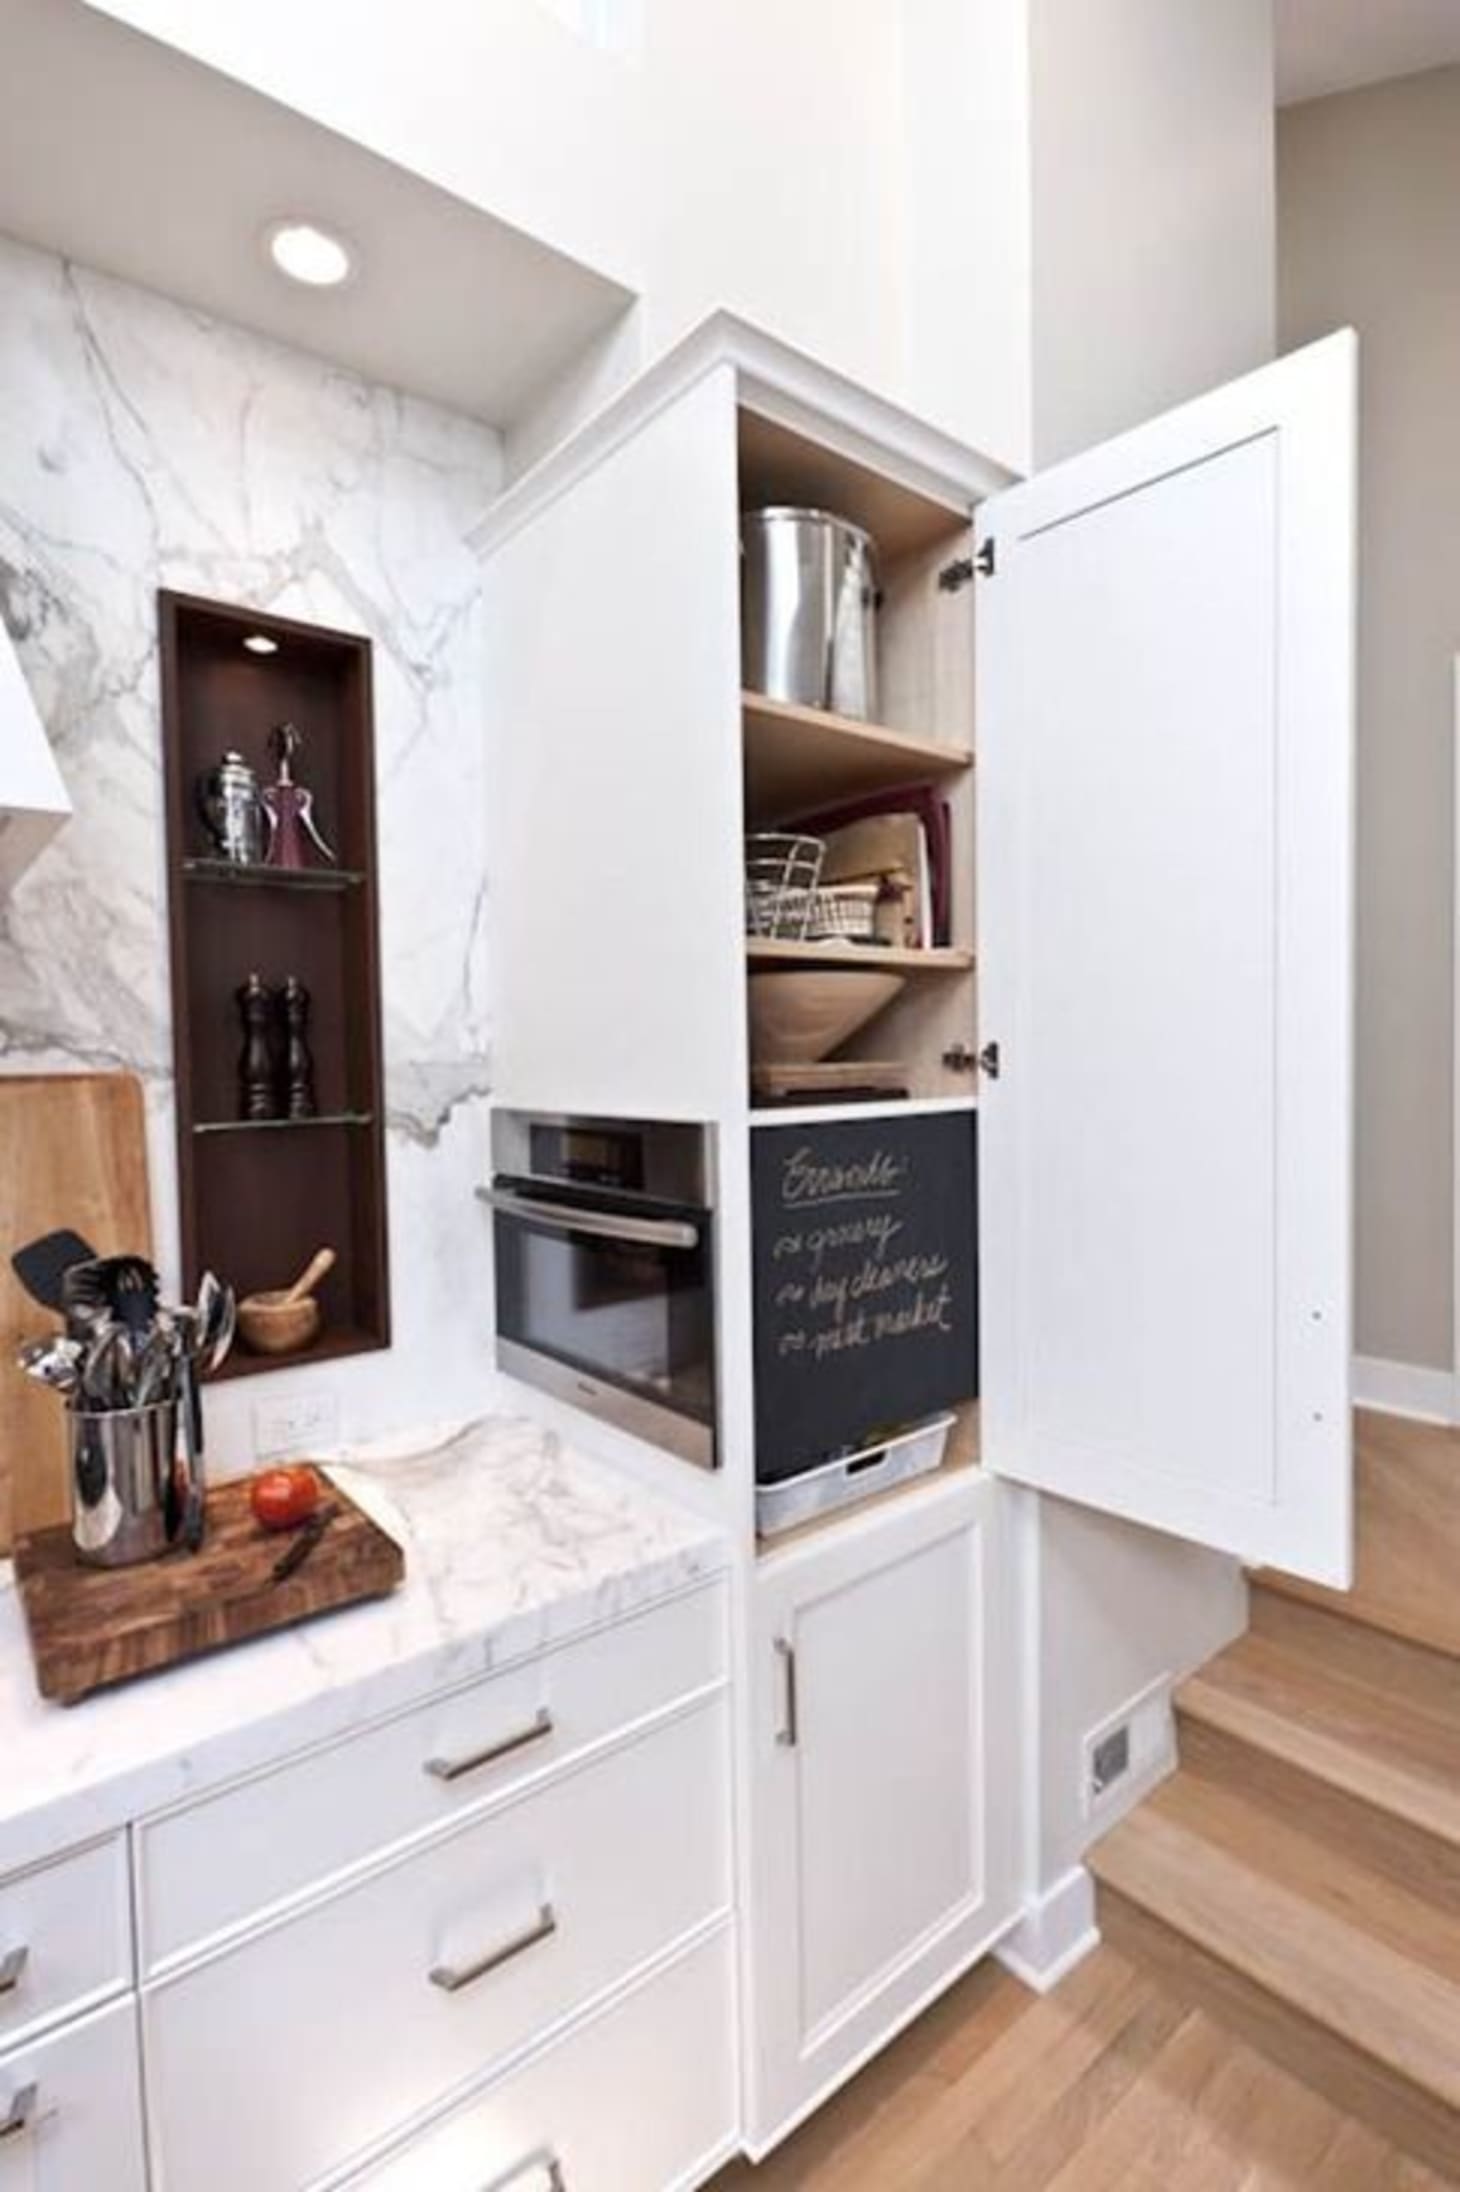 Microwaves in the Kitchen: Hidden Storage Solutions | Apartment Therapy